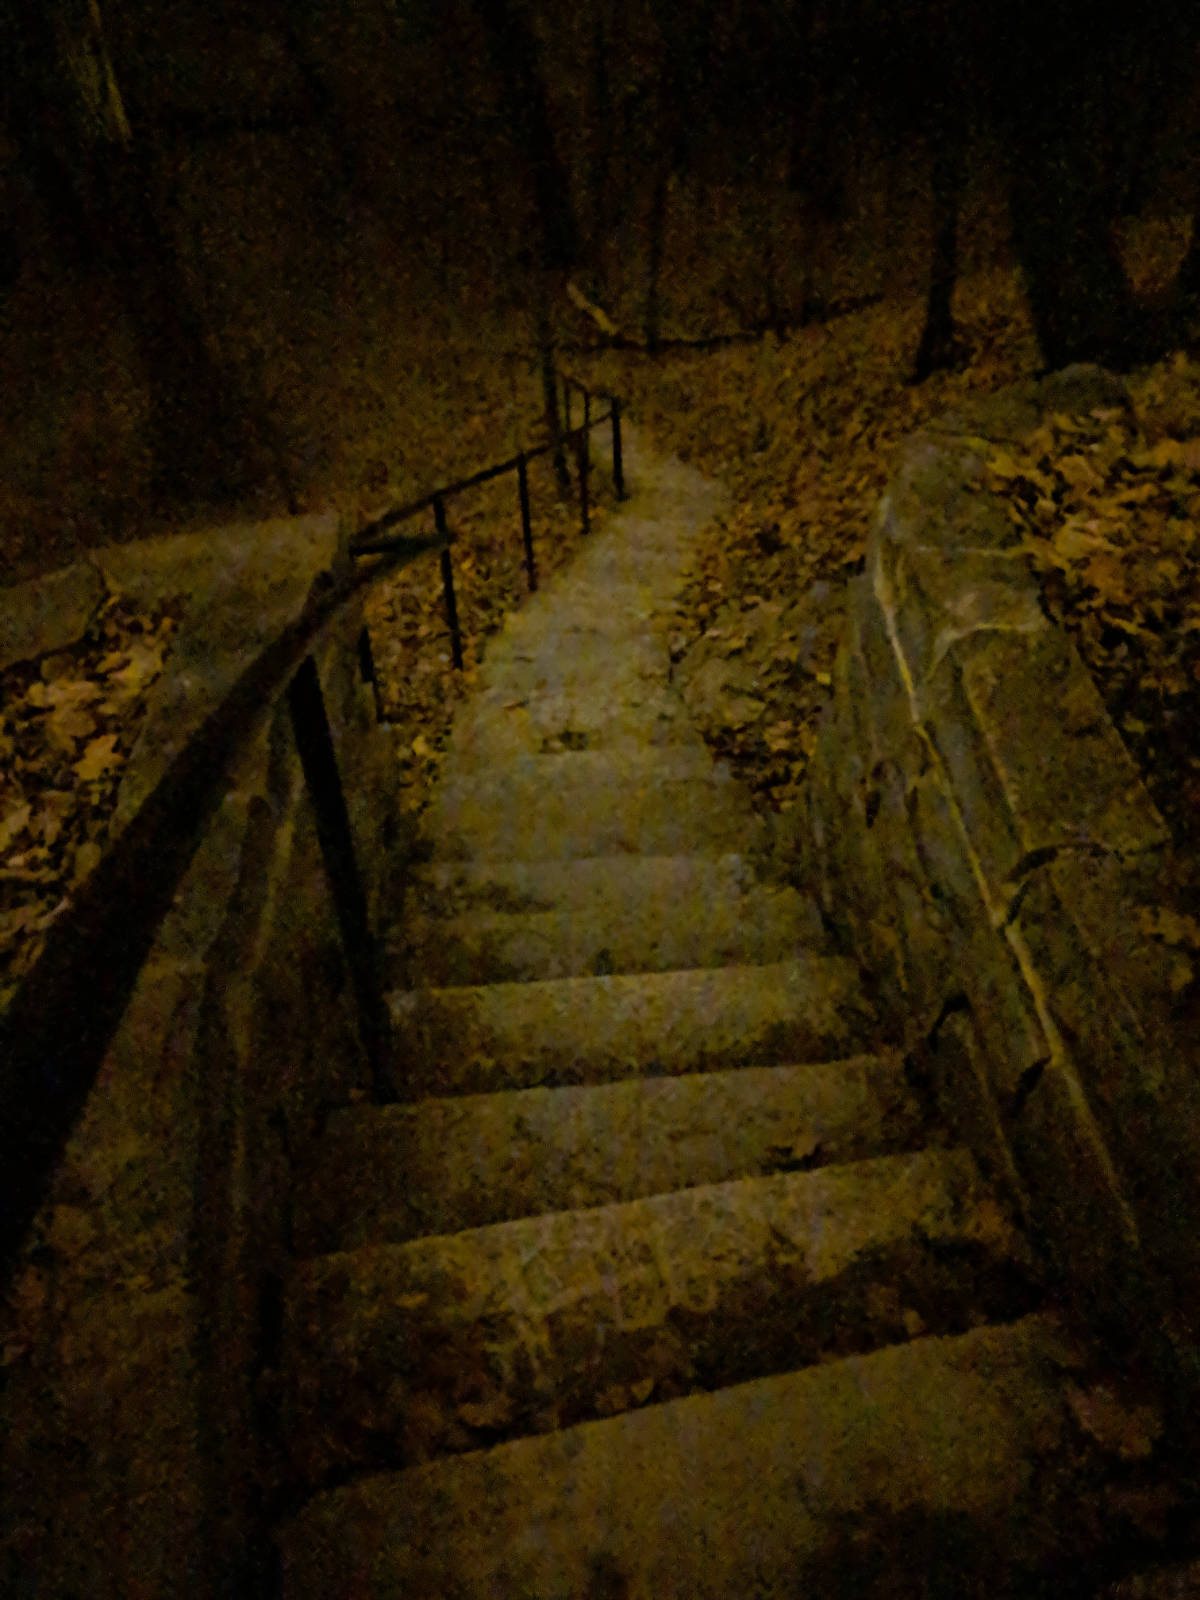 stone stairs going down hill dimly lit at night